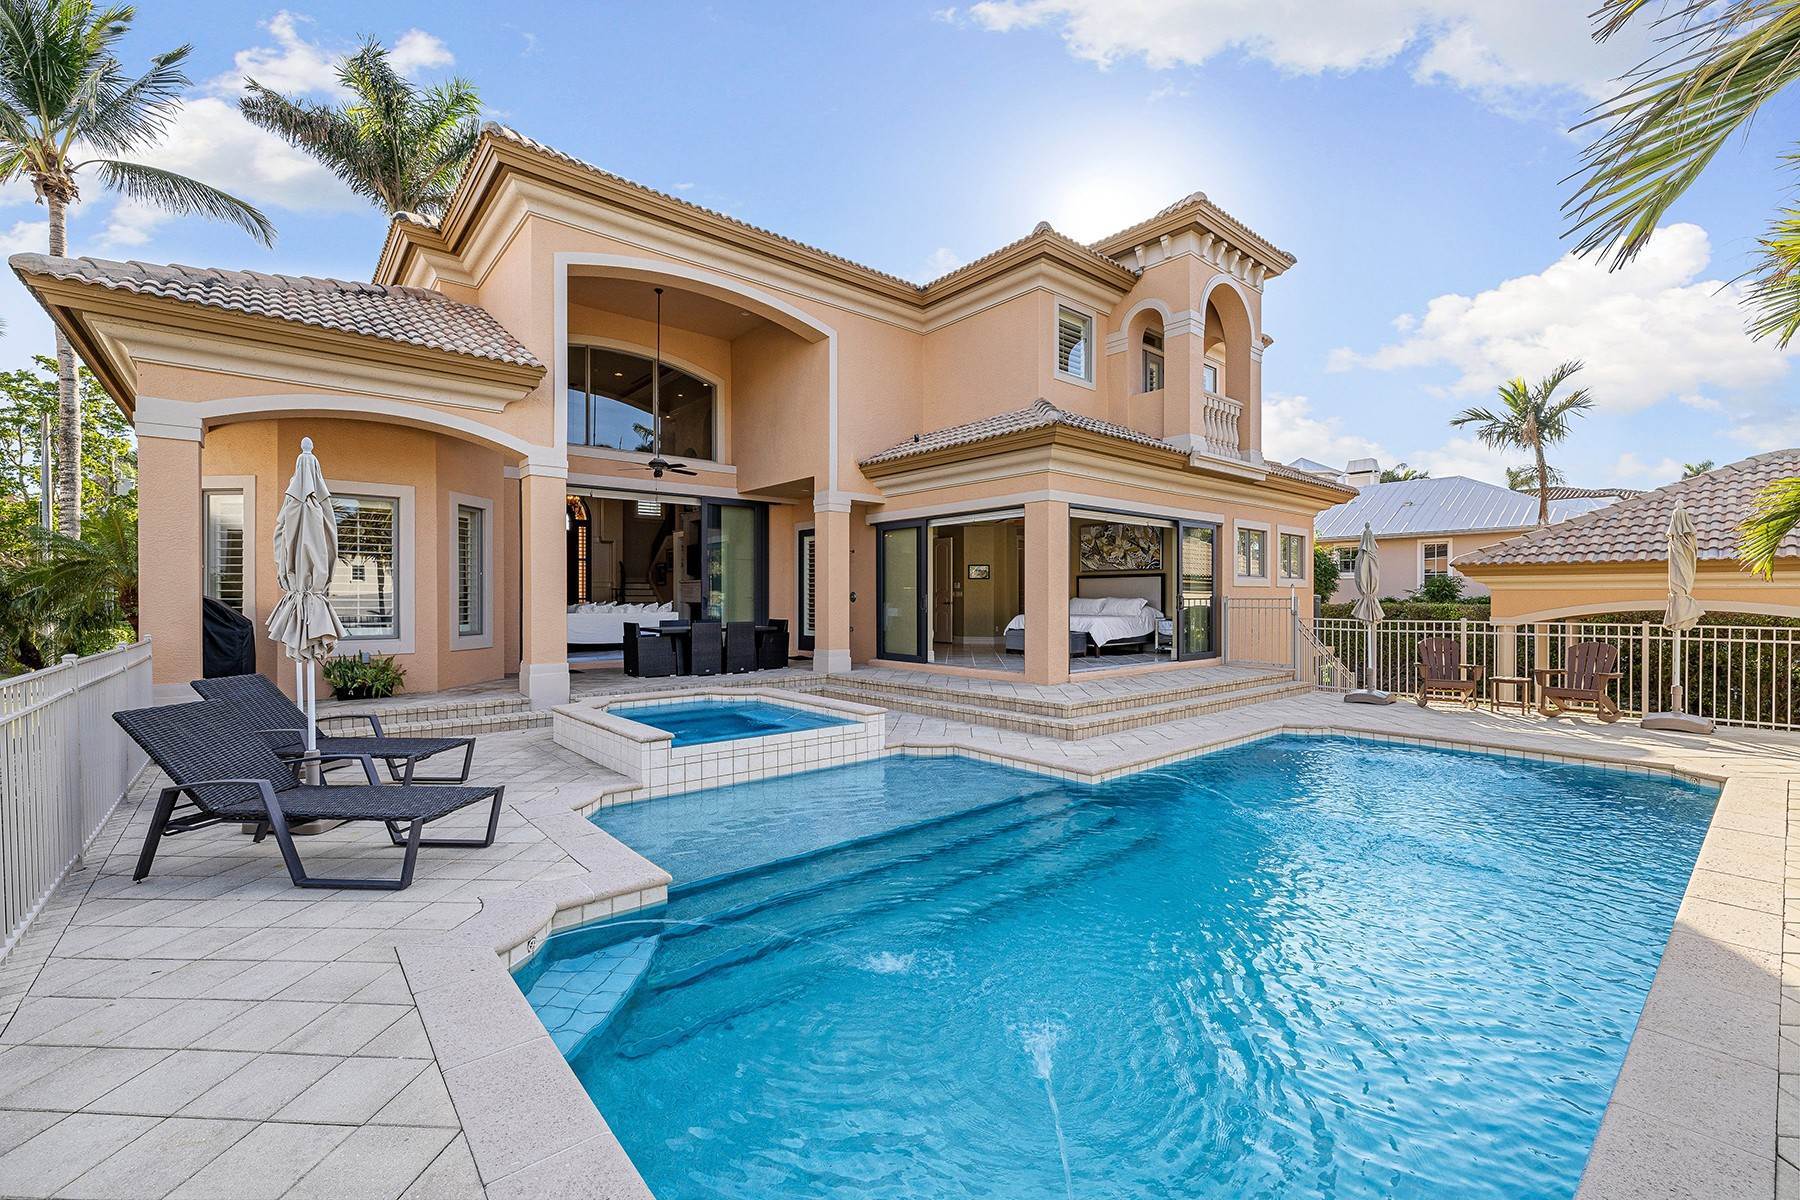 Single Family Homes for Sale at AQUALANE SHORES 533 15th Avenue S Naples, Florida 34102 United States